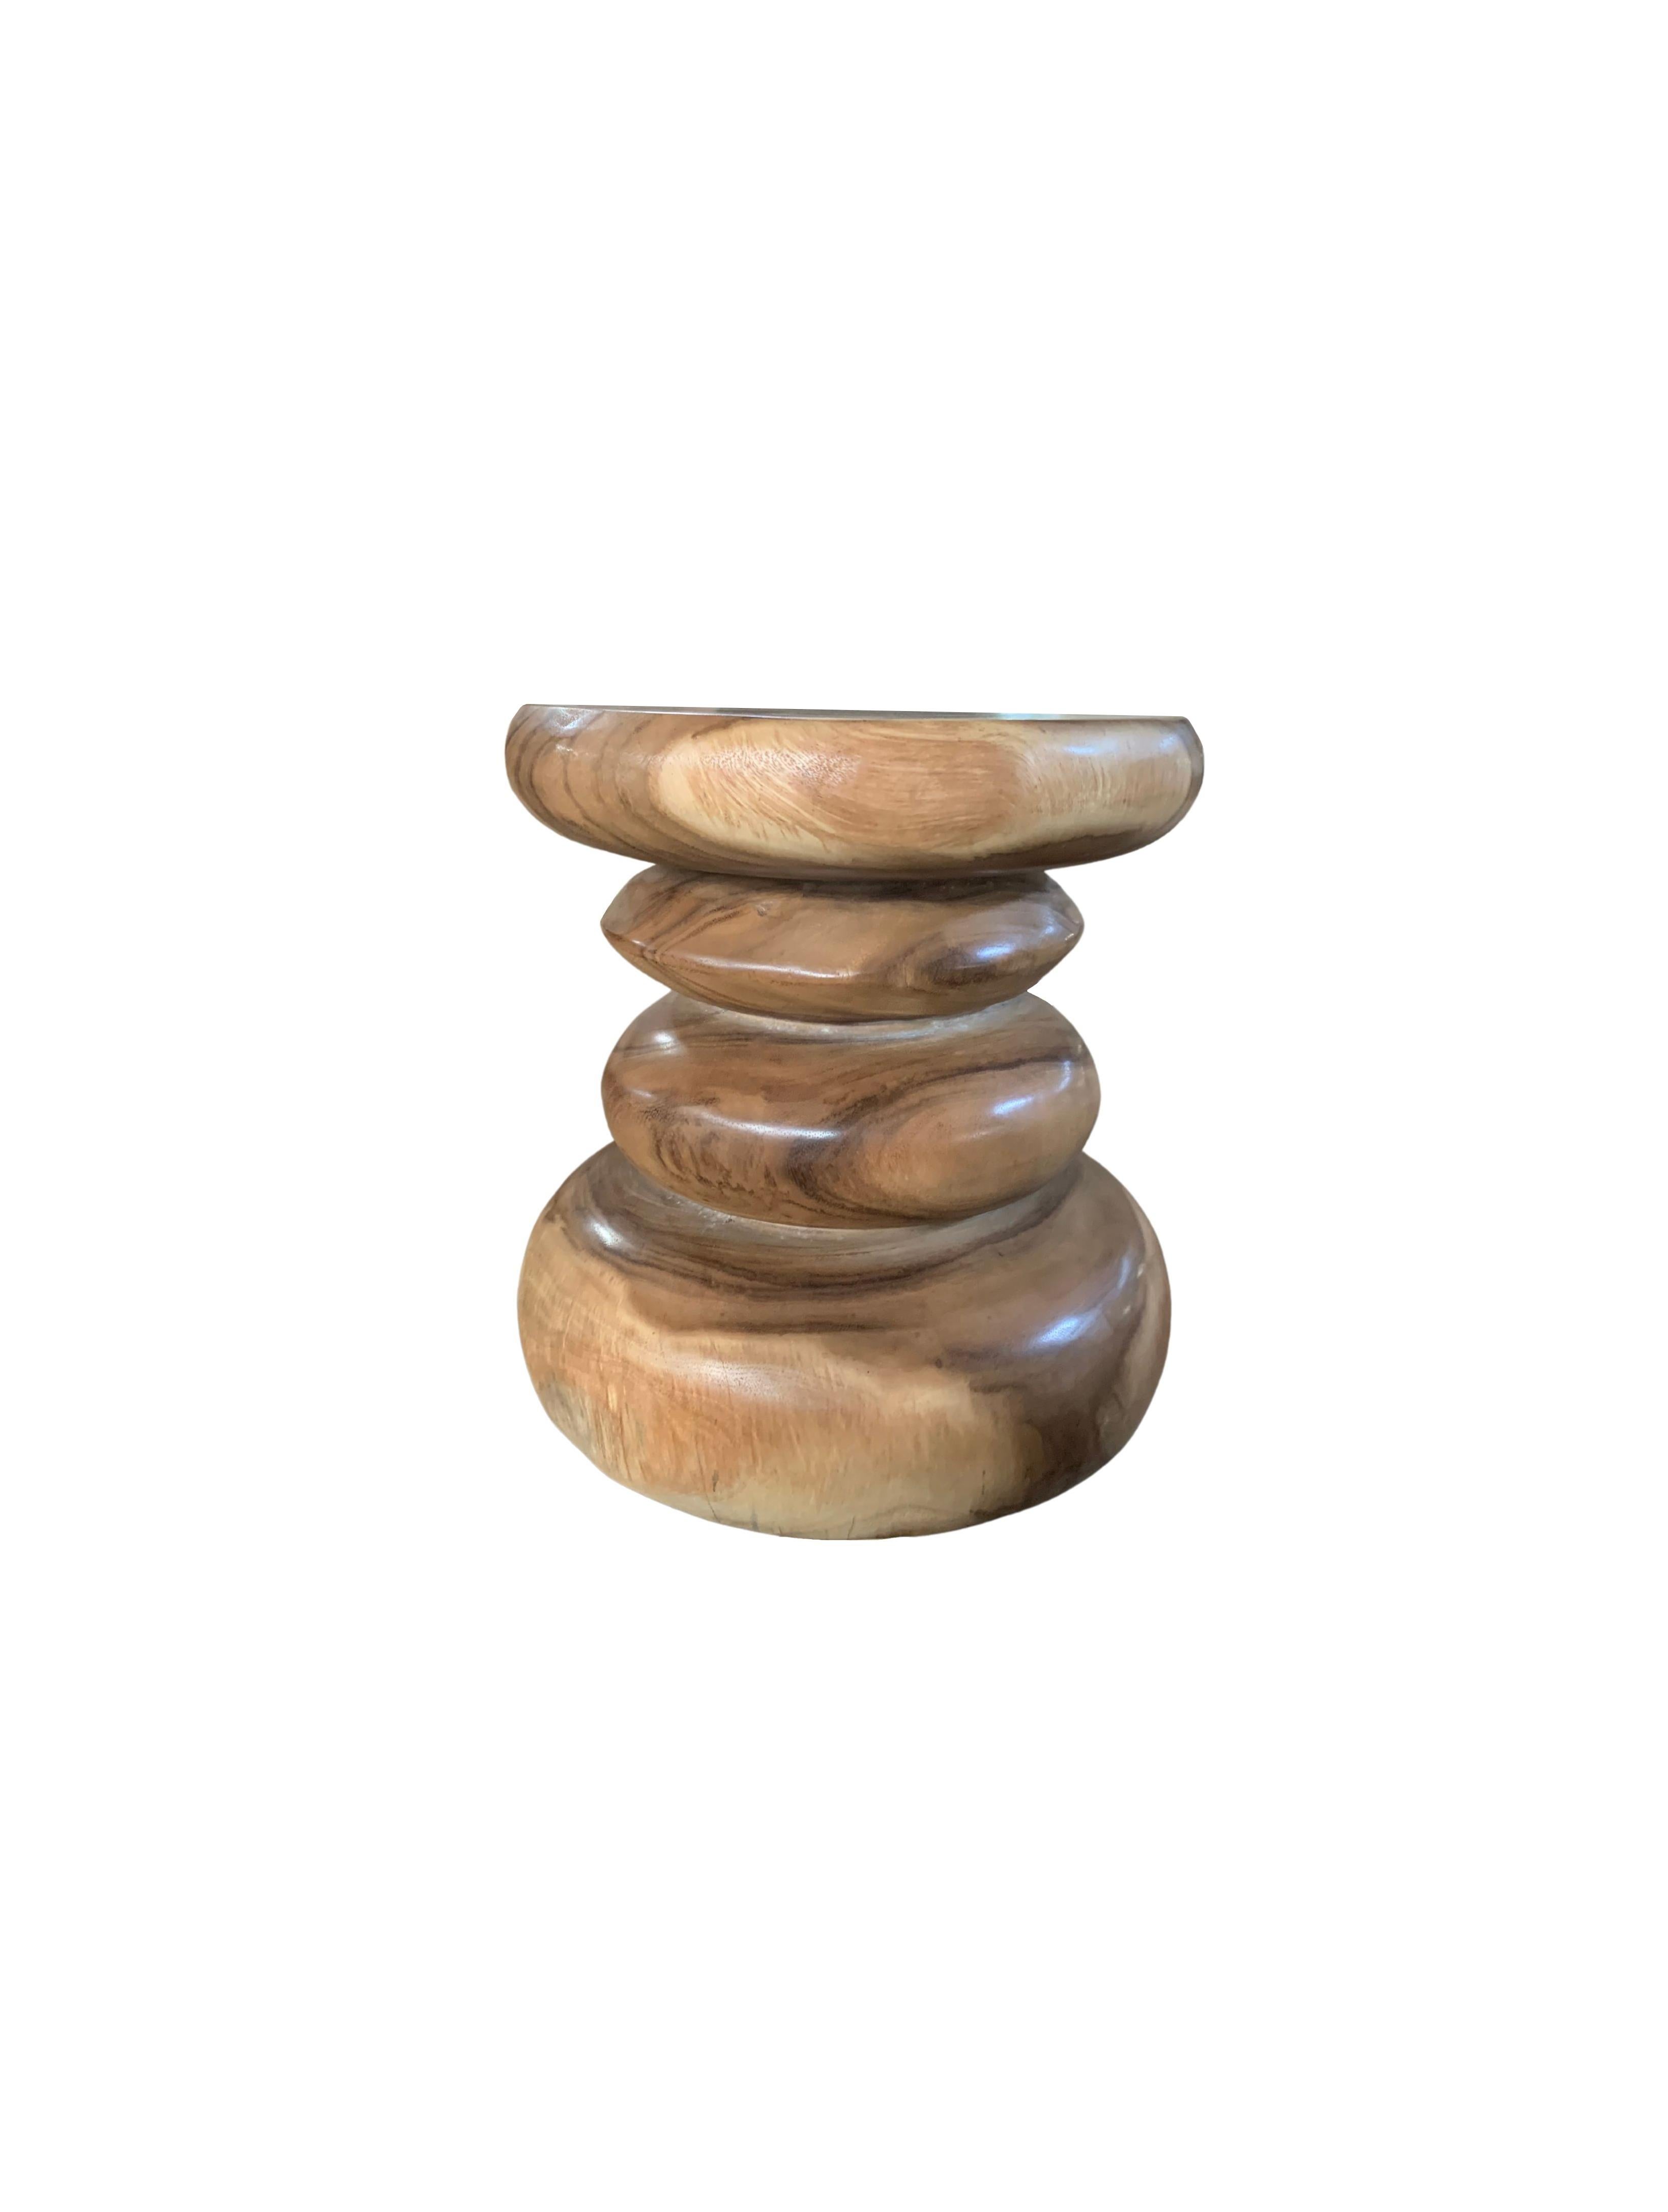 A wonderfully sculptural side table resembling a pile a river stones. Its neutral pigment and subtle wood texture makes it perfect for any space. A uniquely sculptural and versatile piece certain to invoke conversation. This table was crafted from